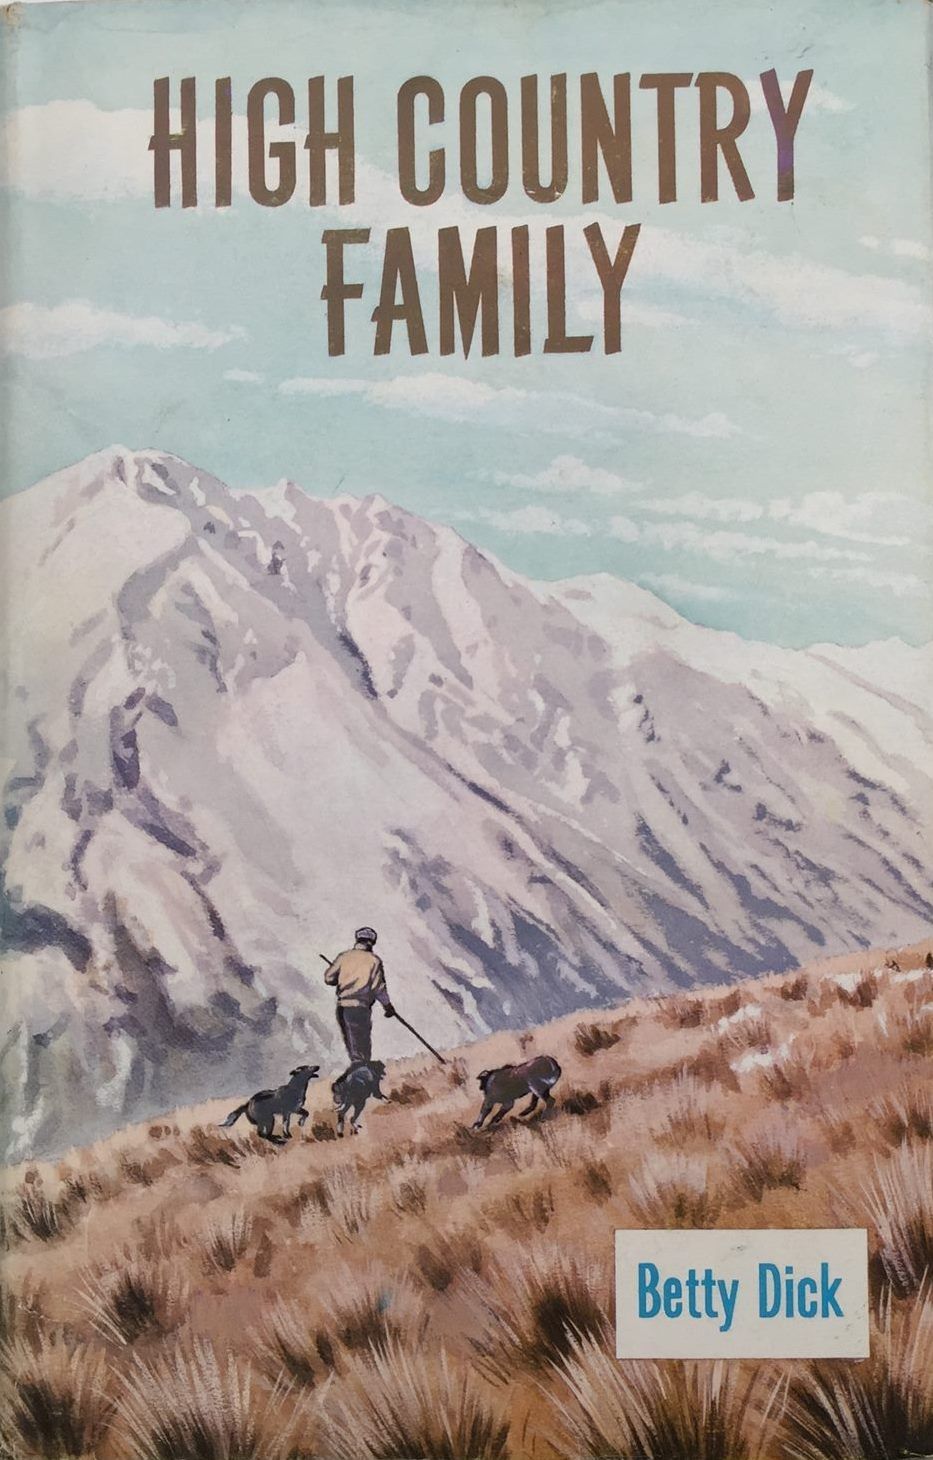 HIGH COUNTRY FAMILY